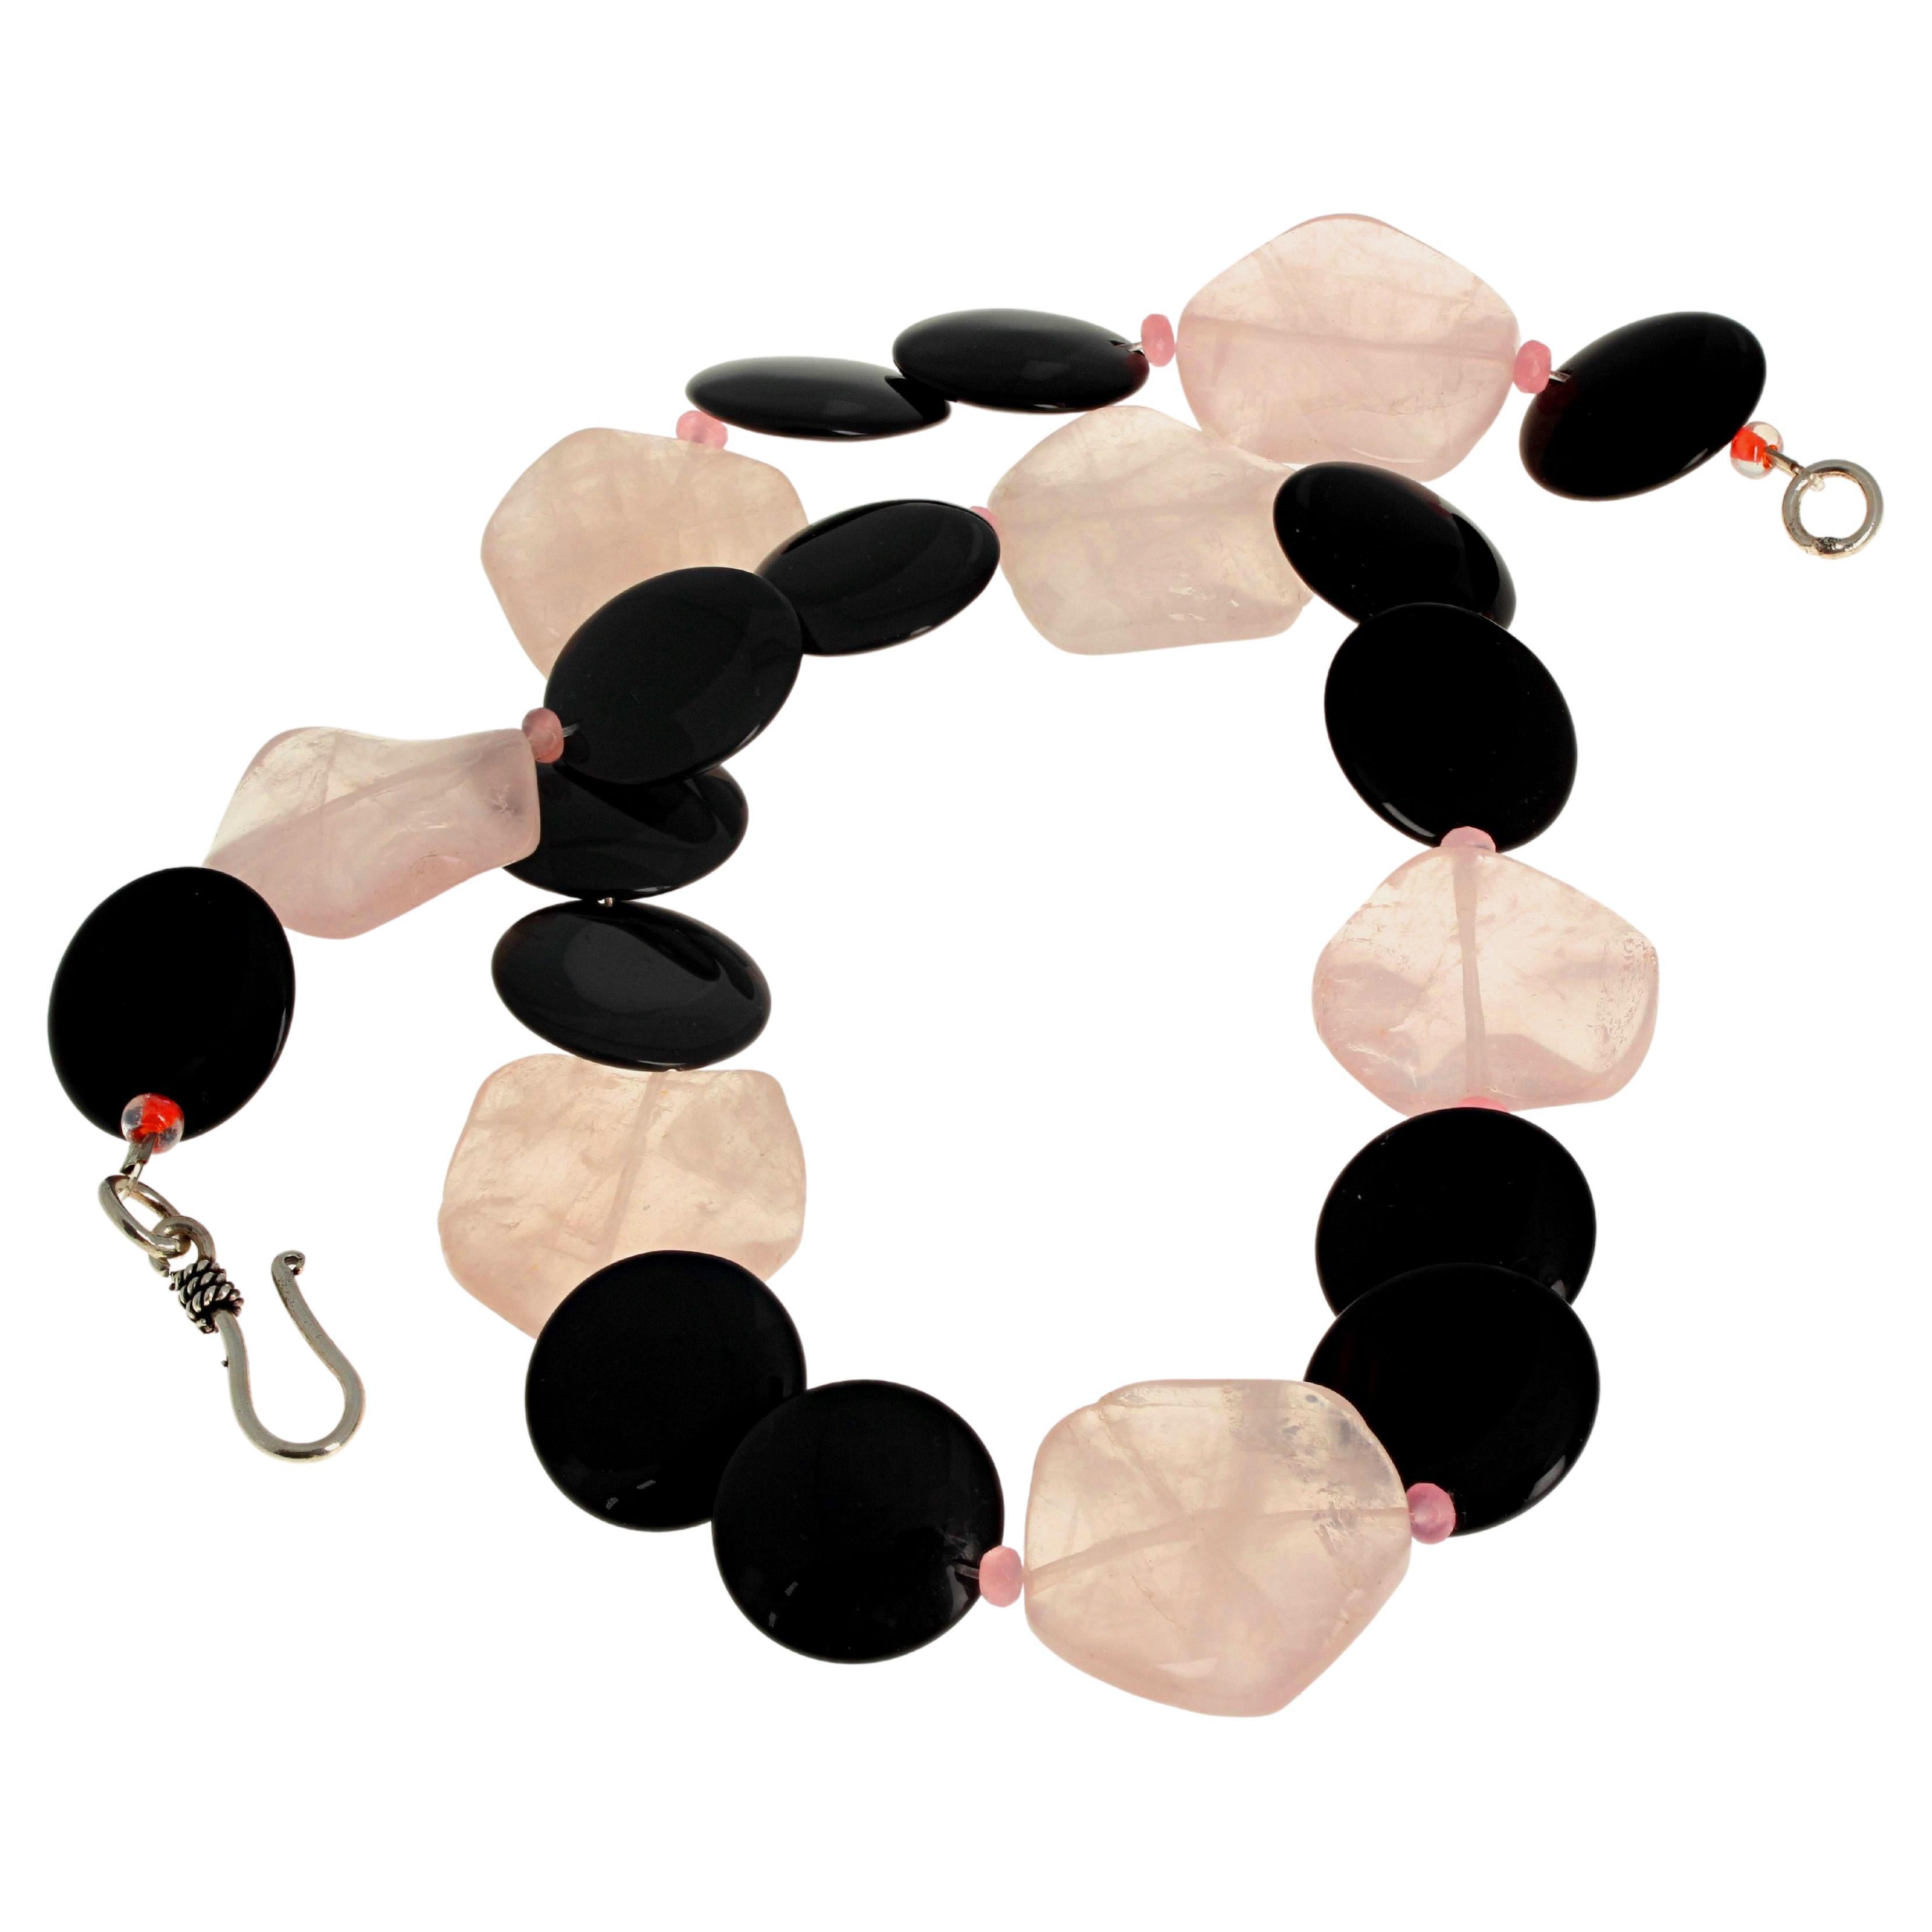 Fascinating and artistic dramatic highly polished Rose Quartz (approximately 25 mm across x 7mm thick) enhanced with highly polished natural black Onyx Rondels (approximately 20mm) and glittering little tiny natural pink Quartz rondels.  This is 20